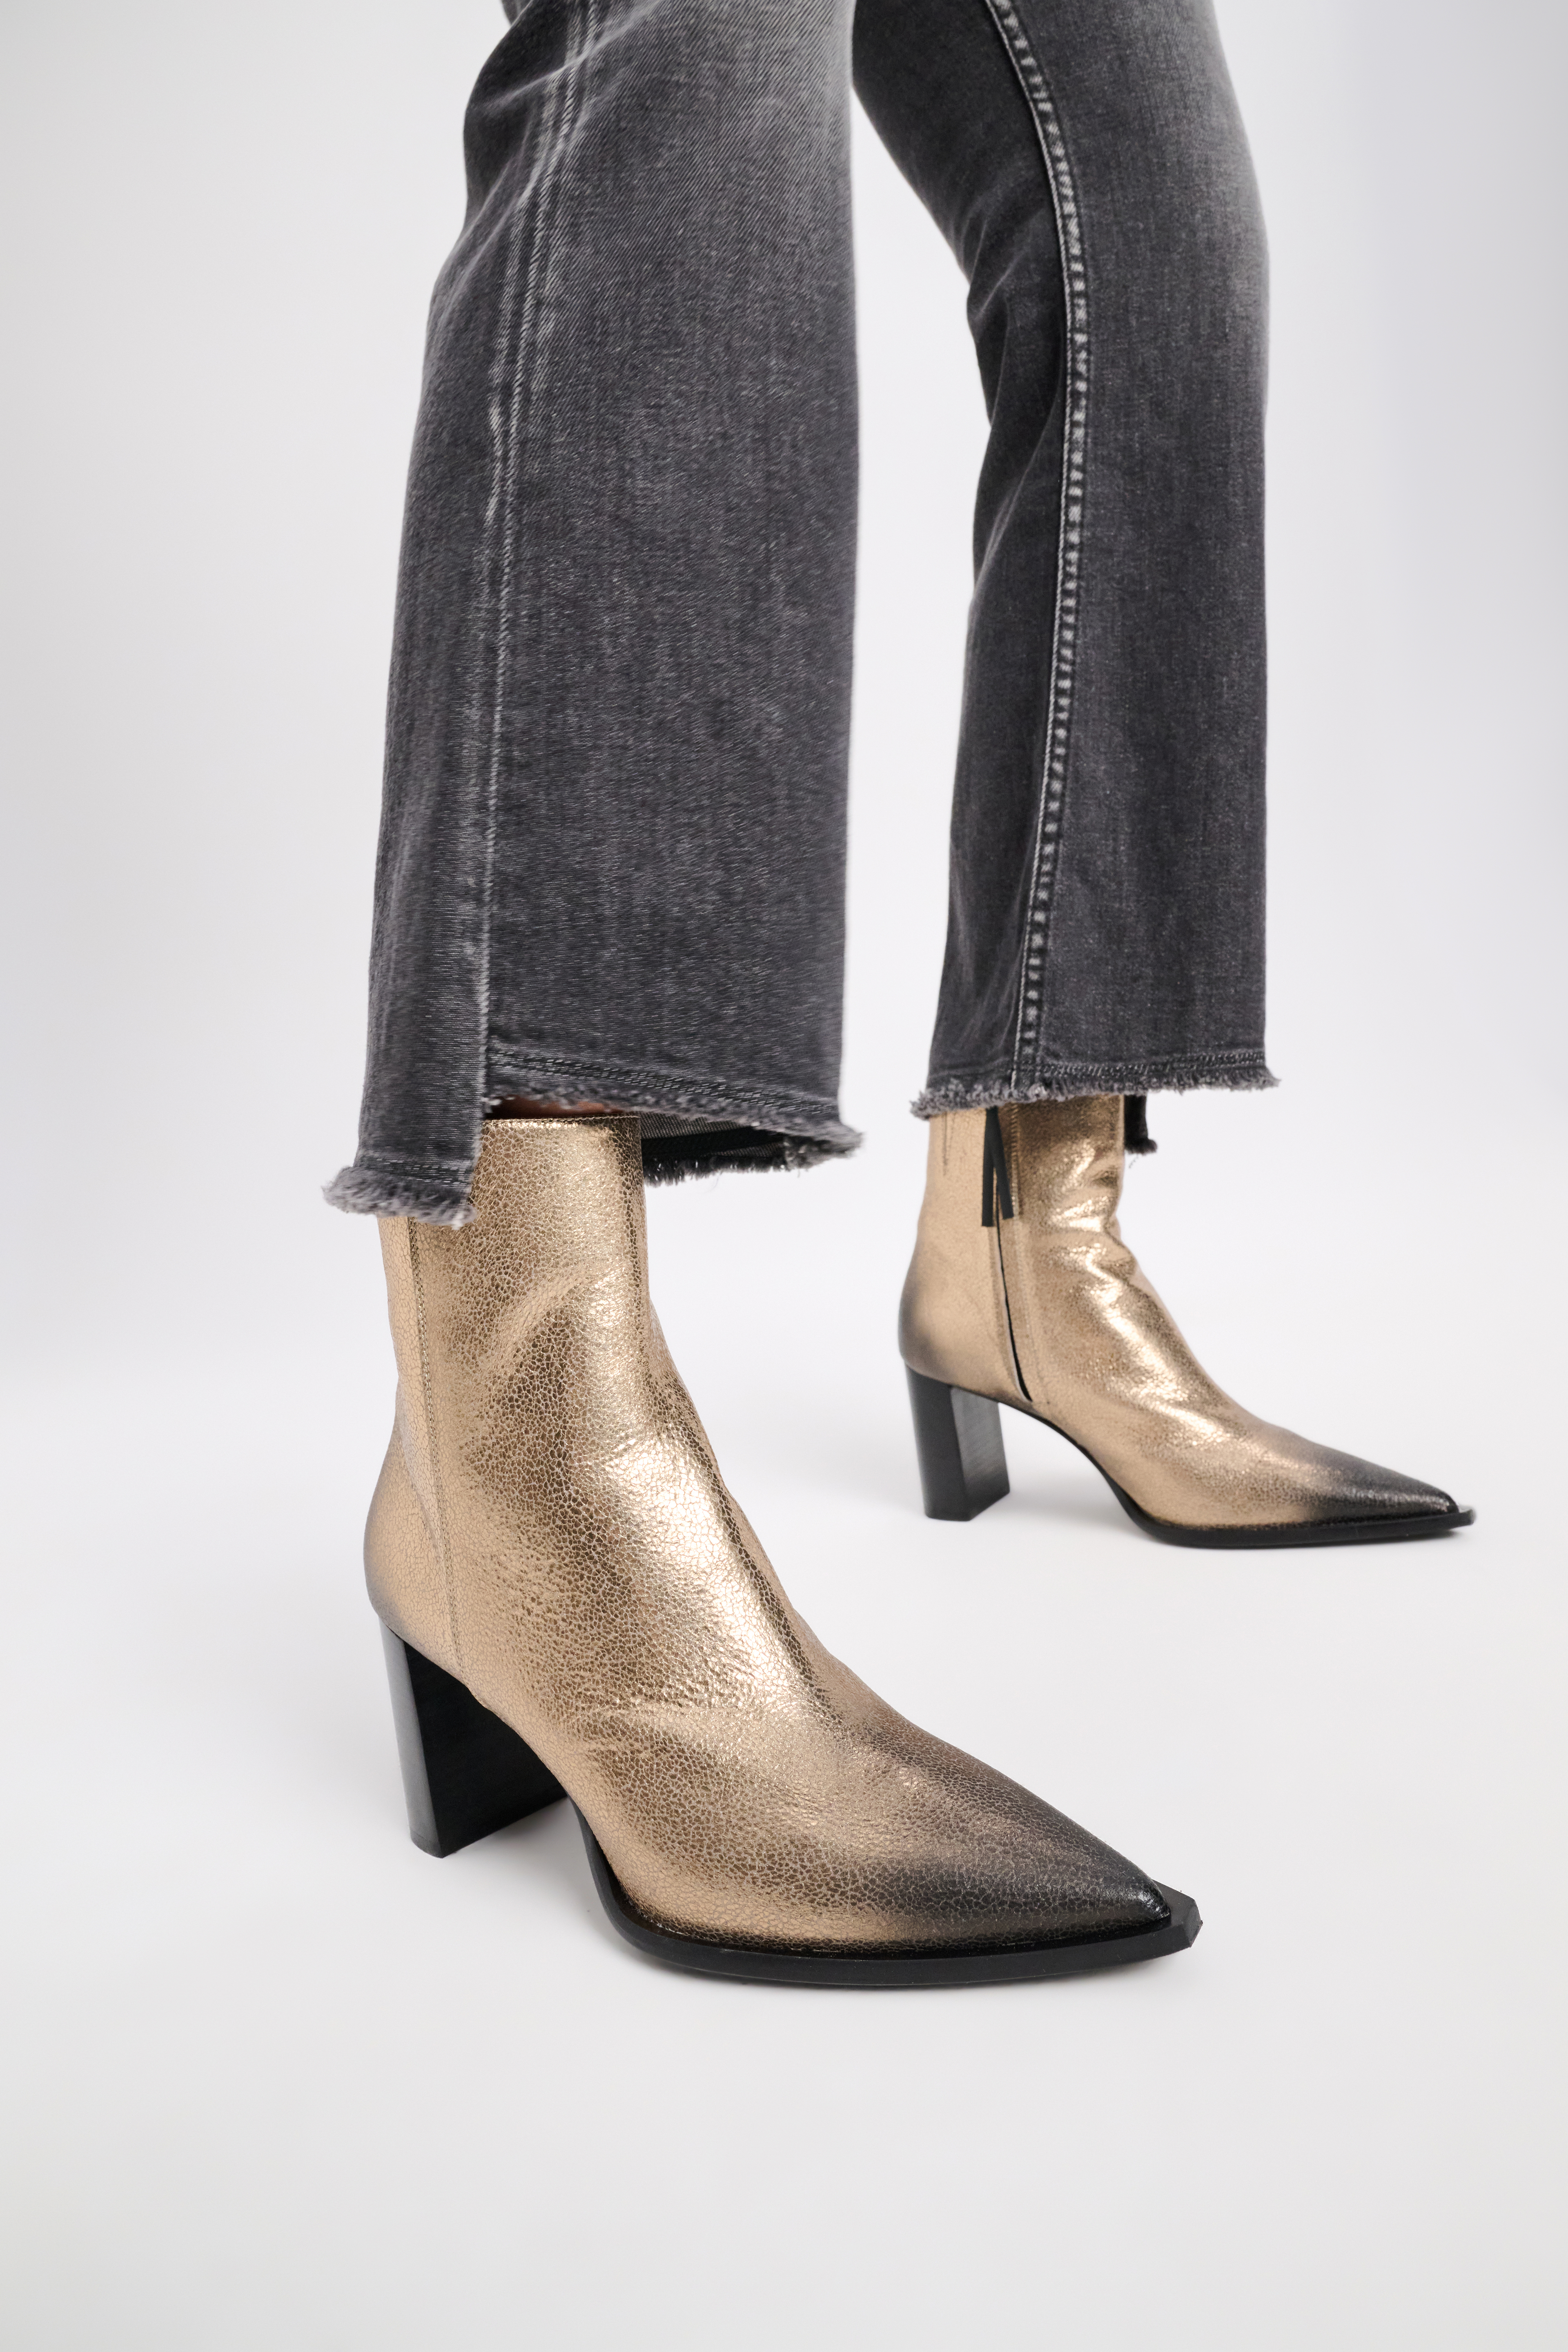 Dorothee Schumacher Metallic crackle leather ankle